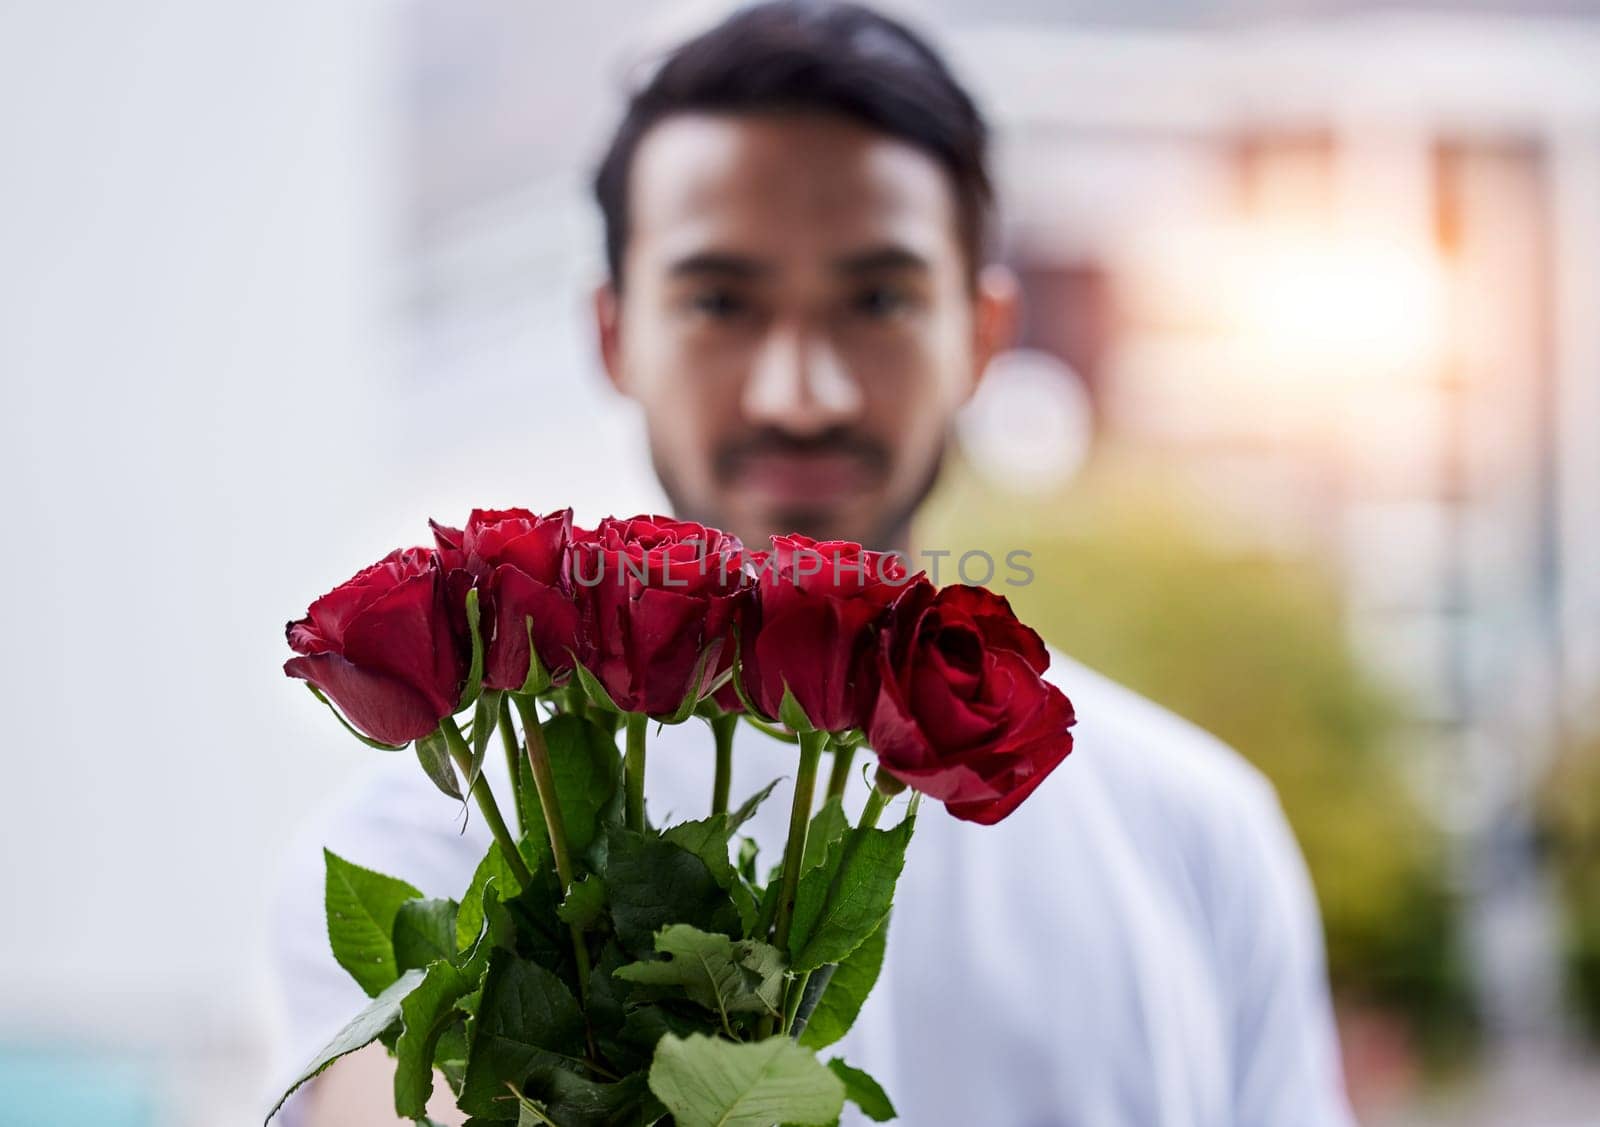 Love, giving and man with bouquet of roses for date, romance and hope for valentines day. Confession, romantic gift and person holding flowers outside, proposal or engagement on blurred background